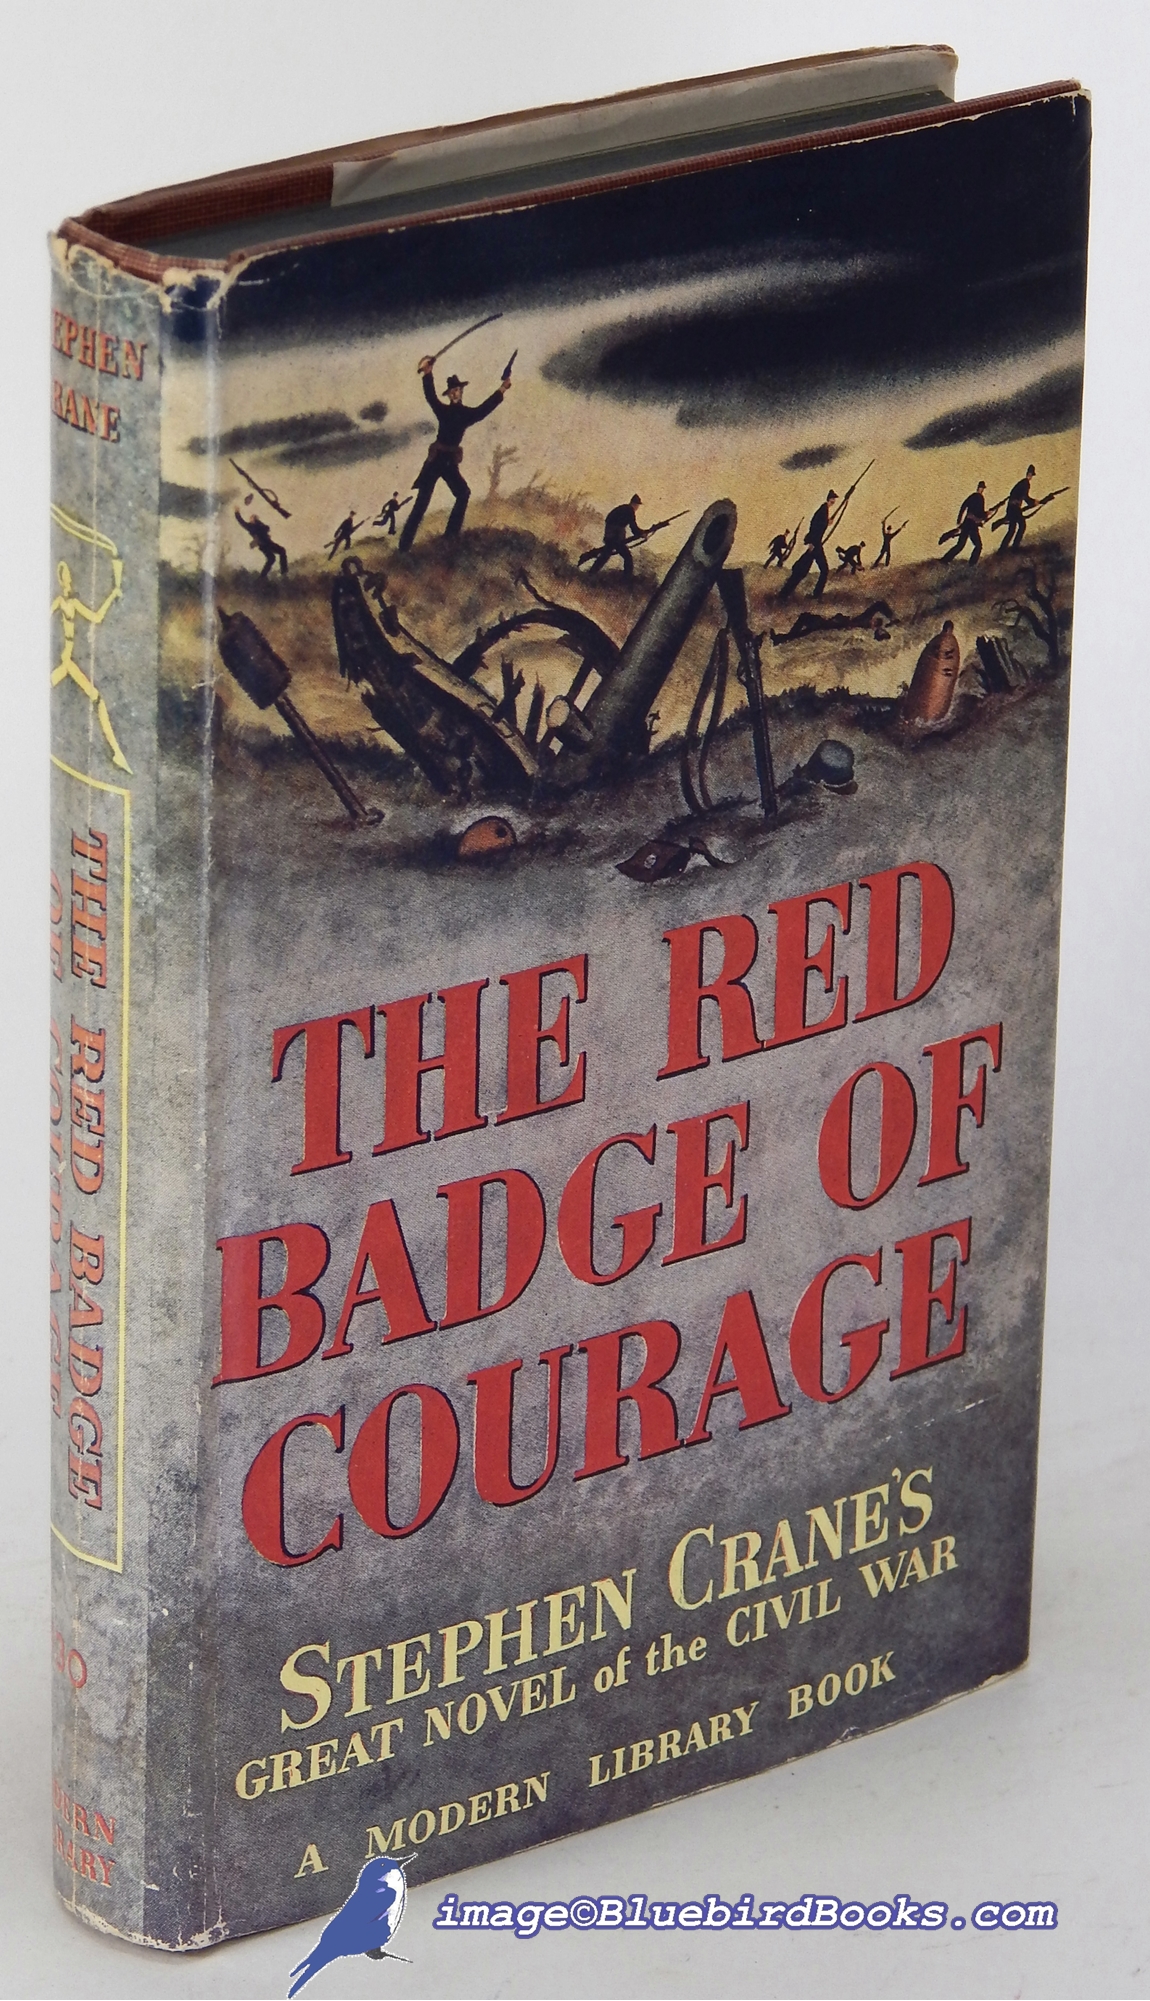 CRANE, STEPHEN - The Red Badge of Courage: An Episode of the American CIVIL War (Modern Library #130. 4)